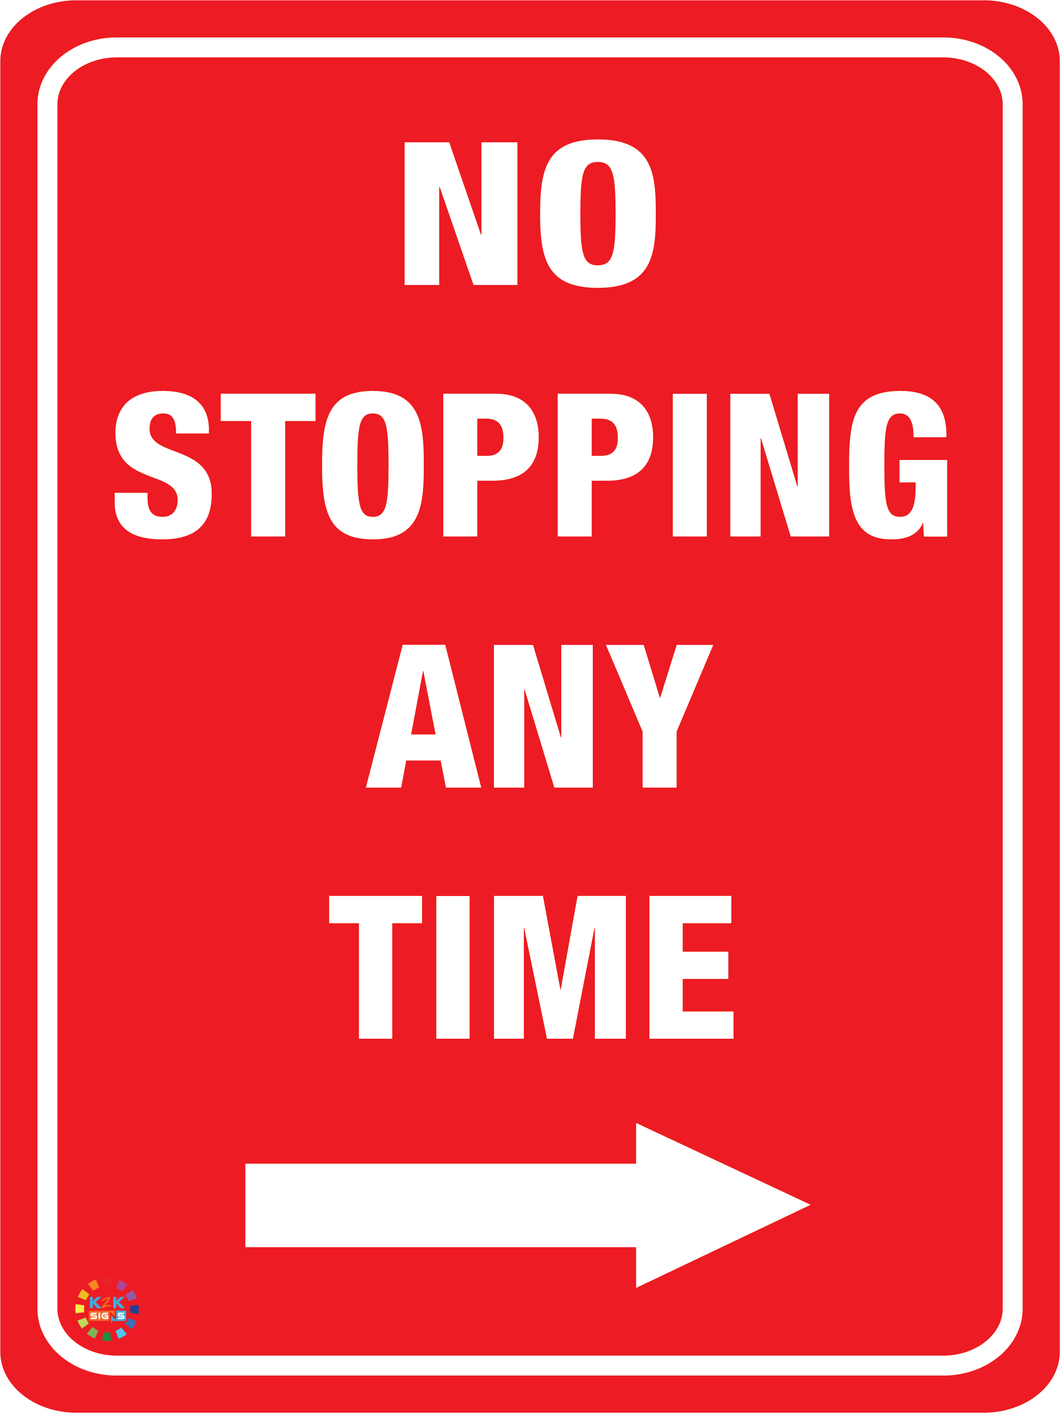 No Stopping At Any Time - Right Arrow Sign